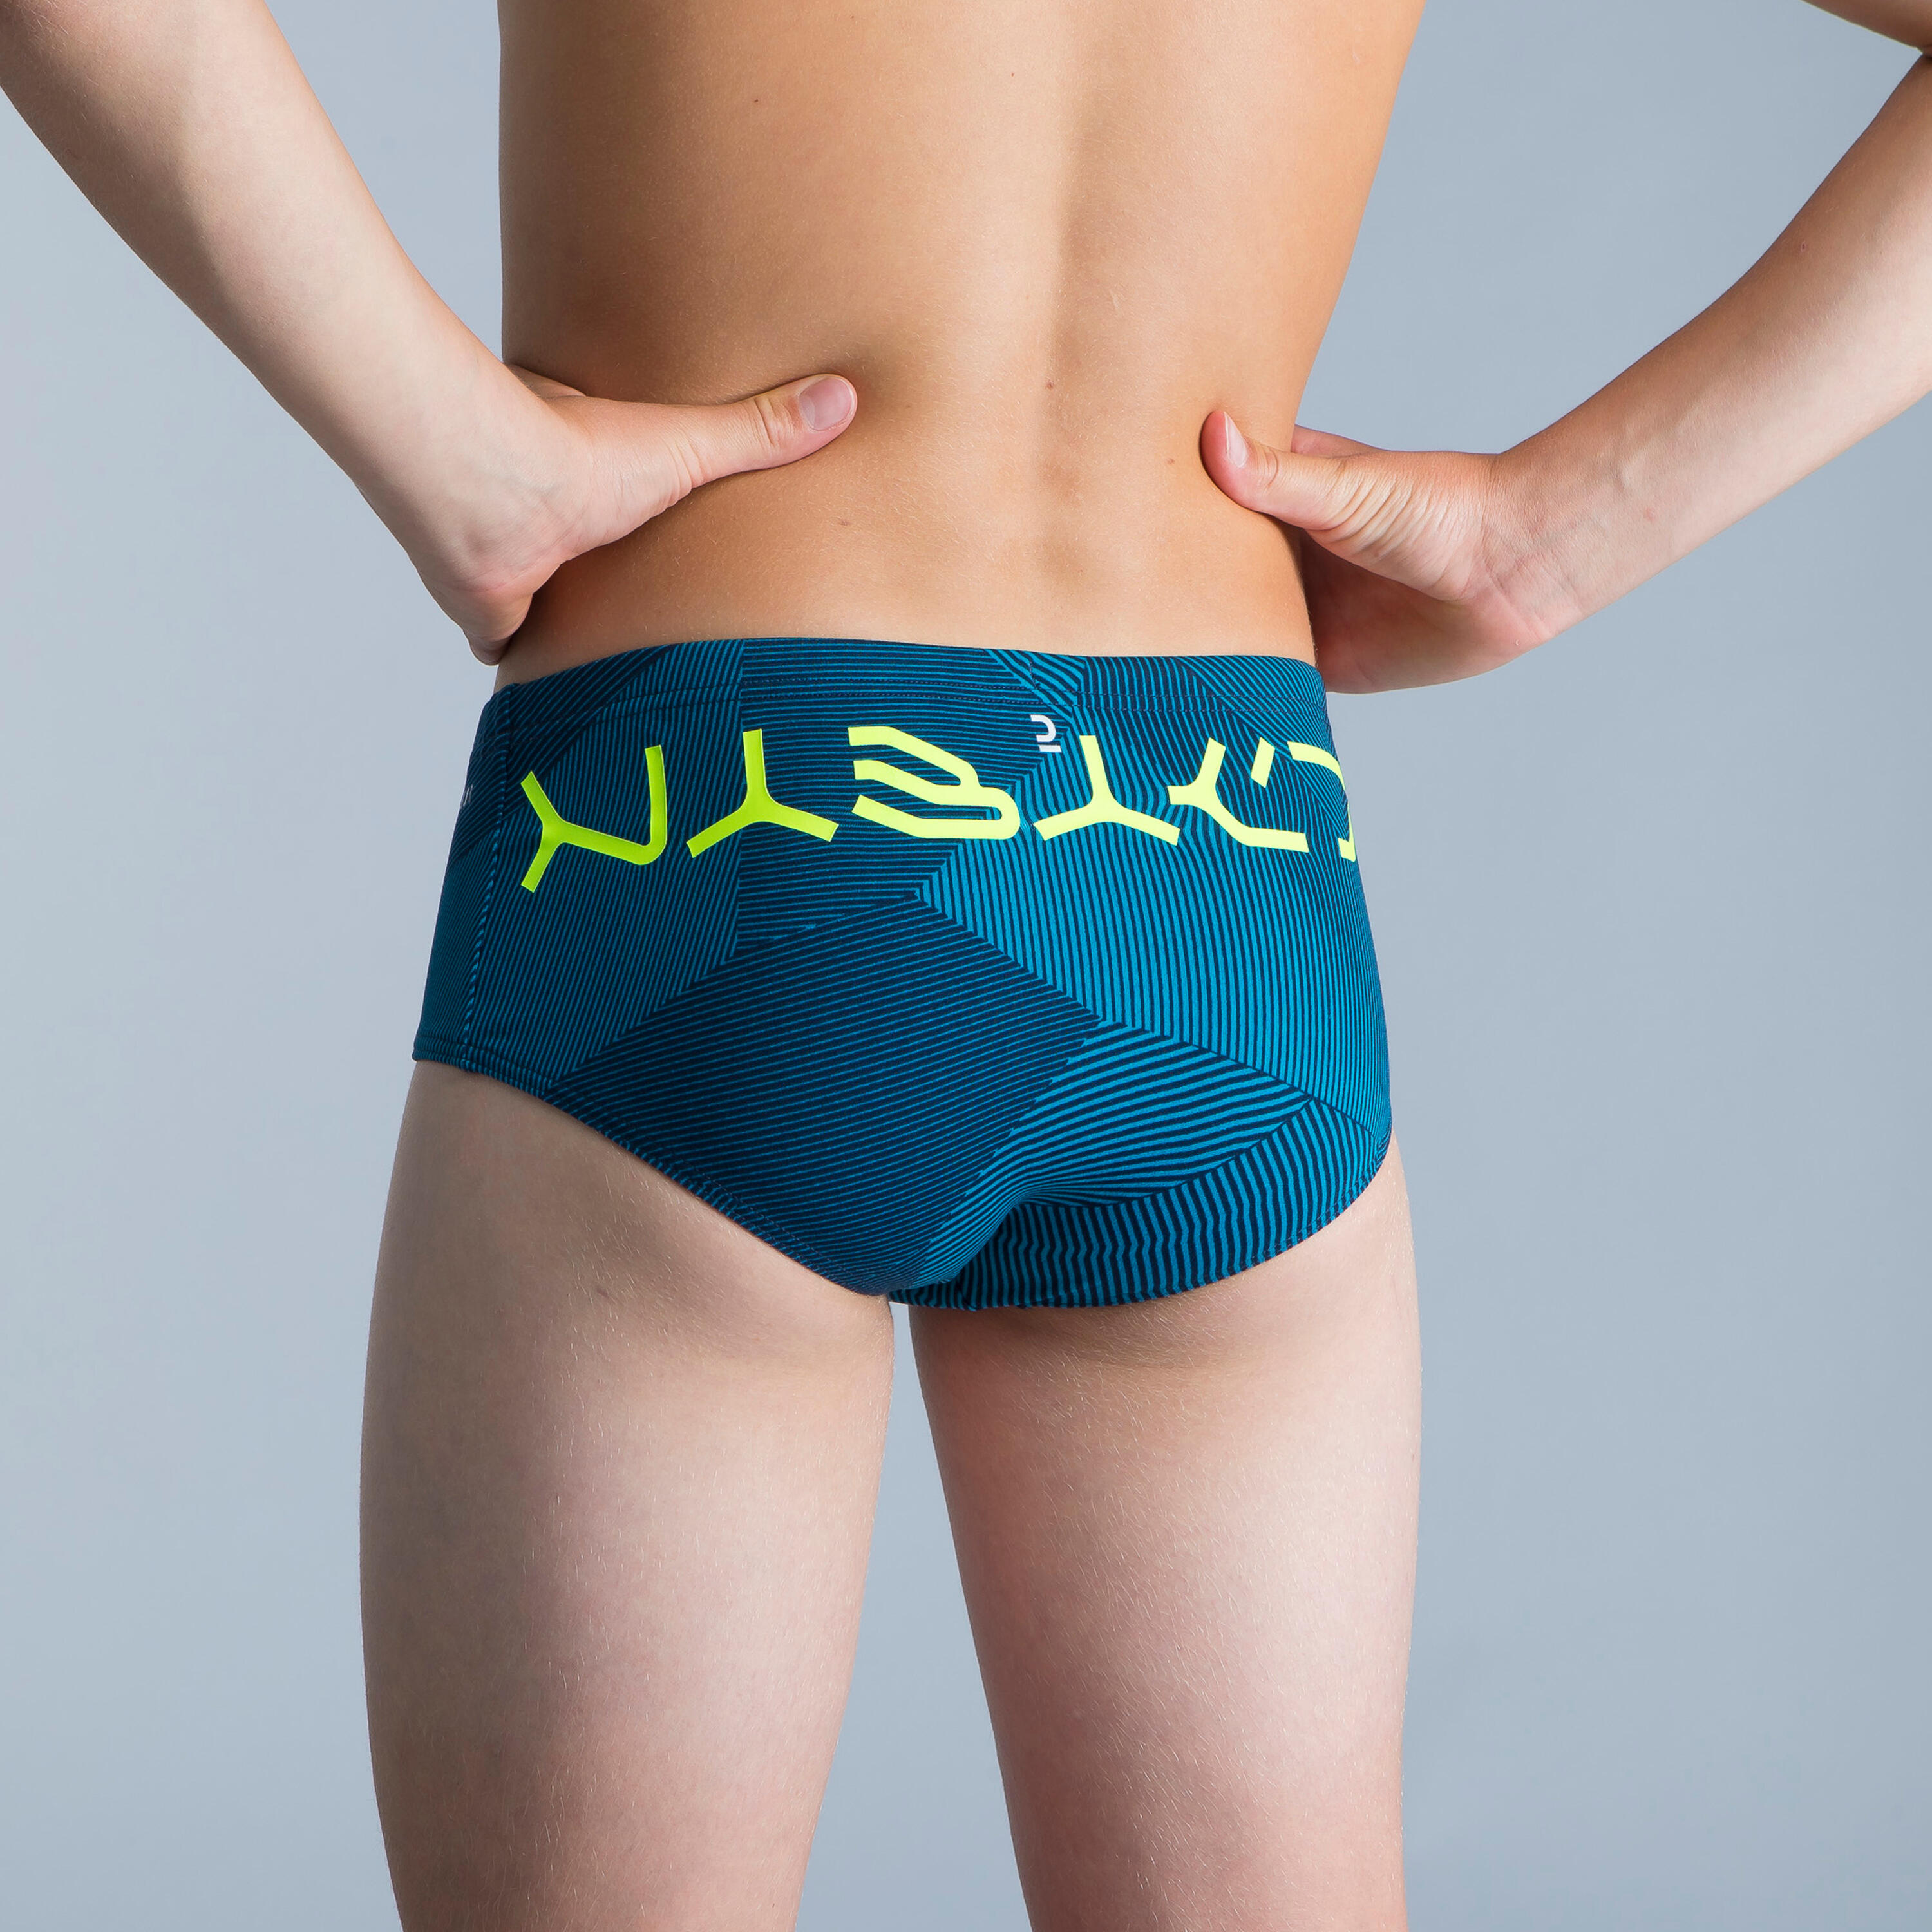 SWIMMING TRUNKS SQUARE-CUT BRIEFS 900 - LINES BLUE 3/4